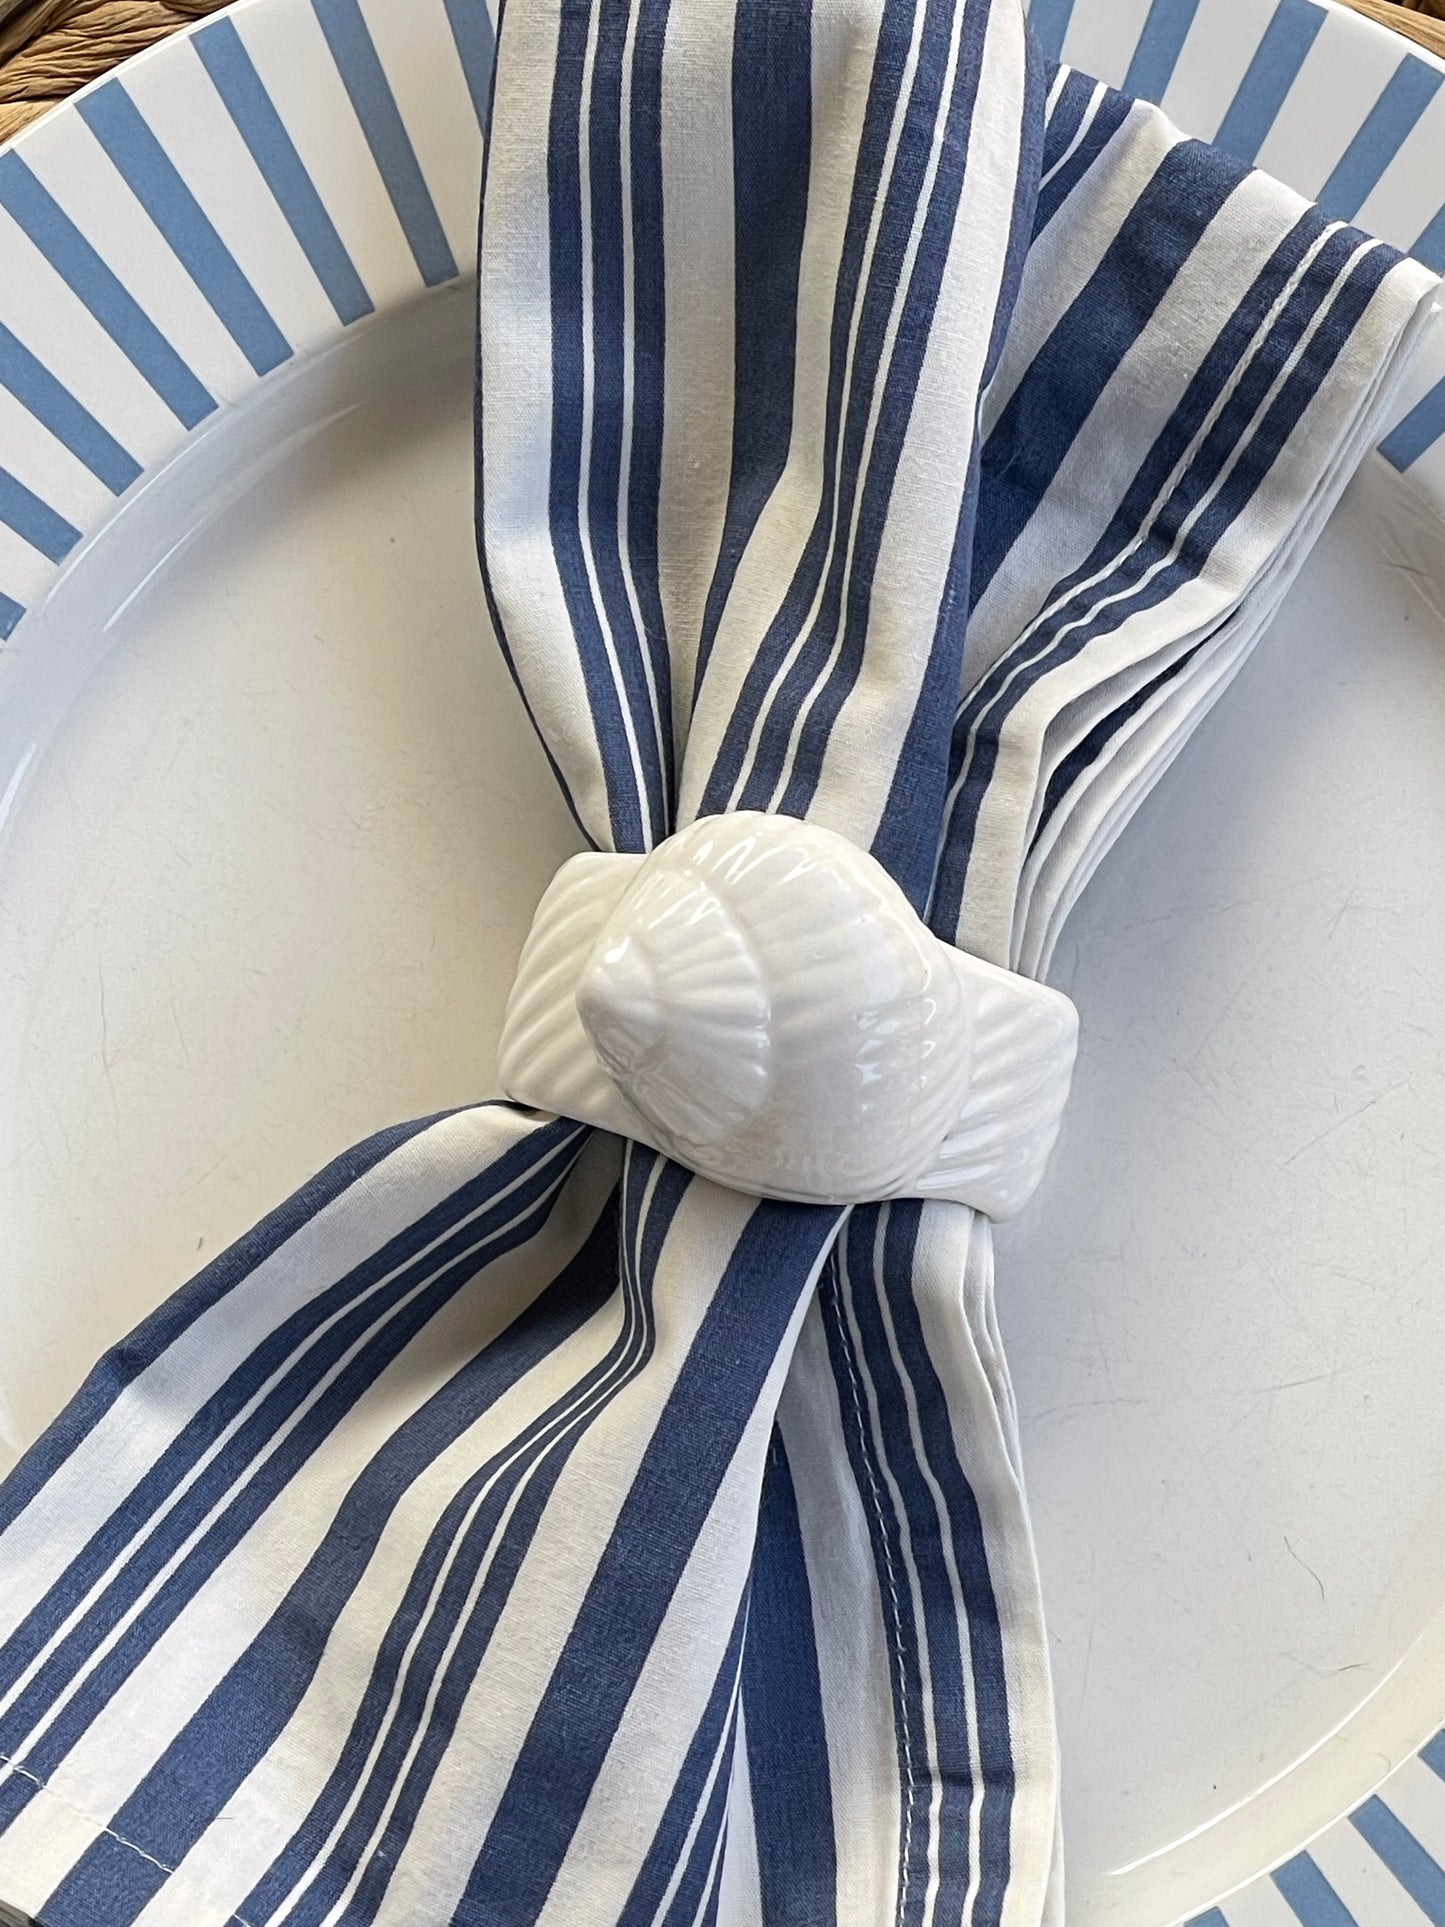 Outer Banks Napkin Rings, Set of 4